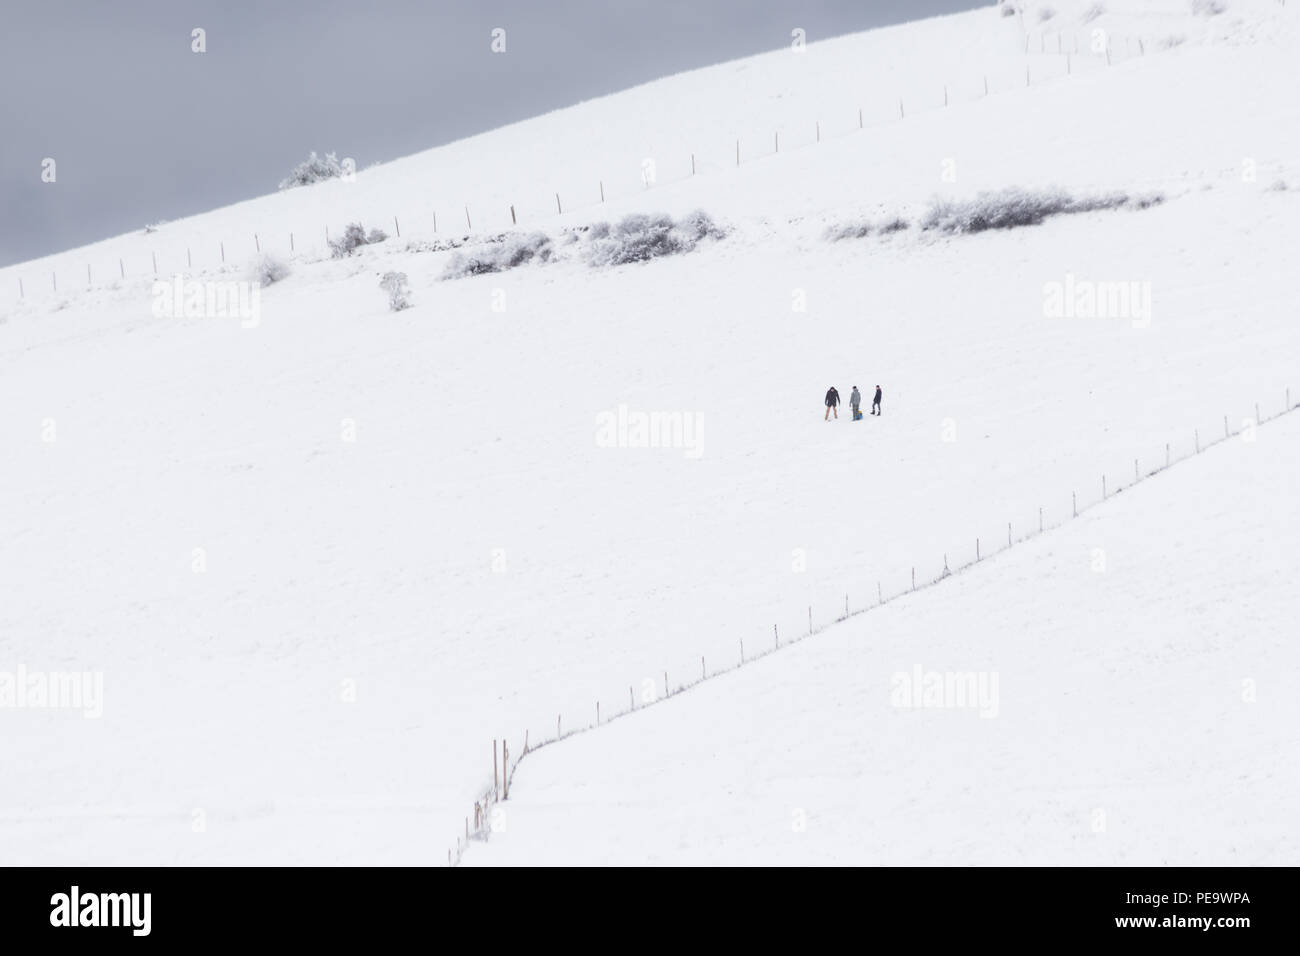 Some people in the middle of snow on a mountain, with some fences Stock Photo